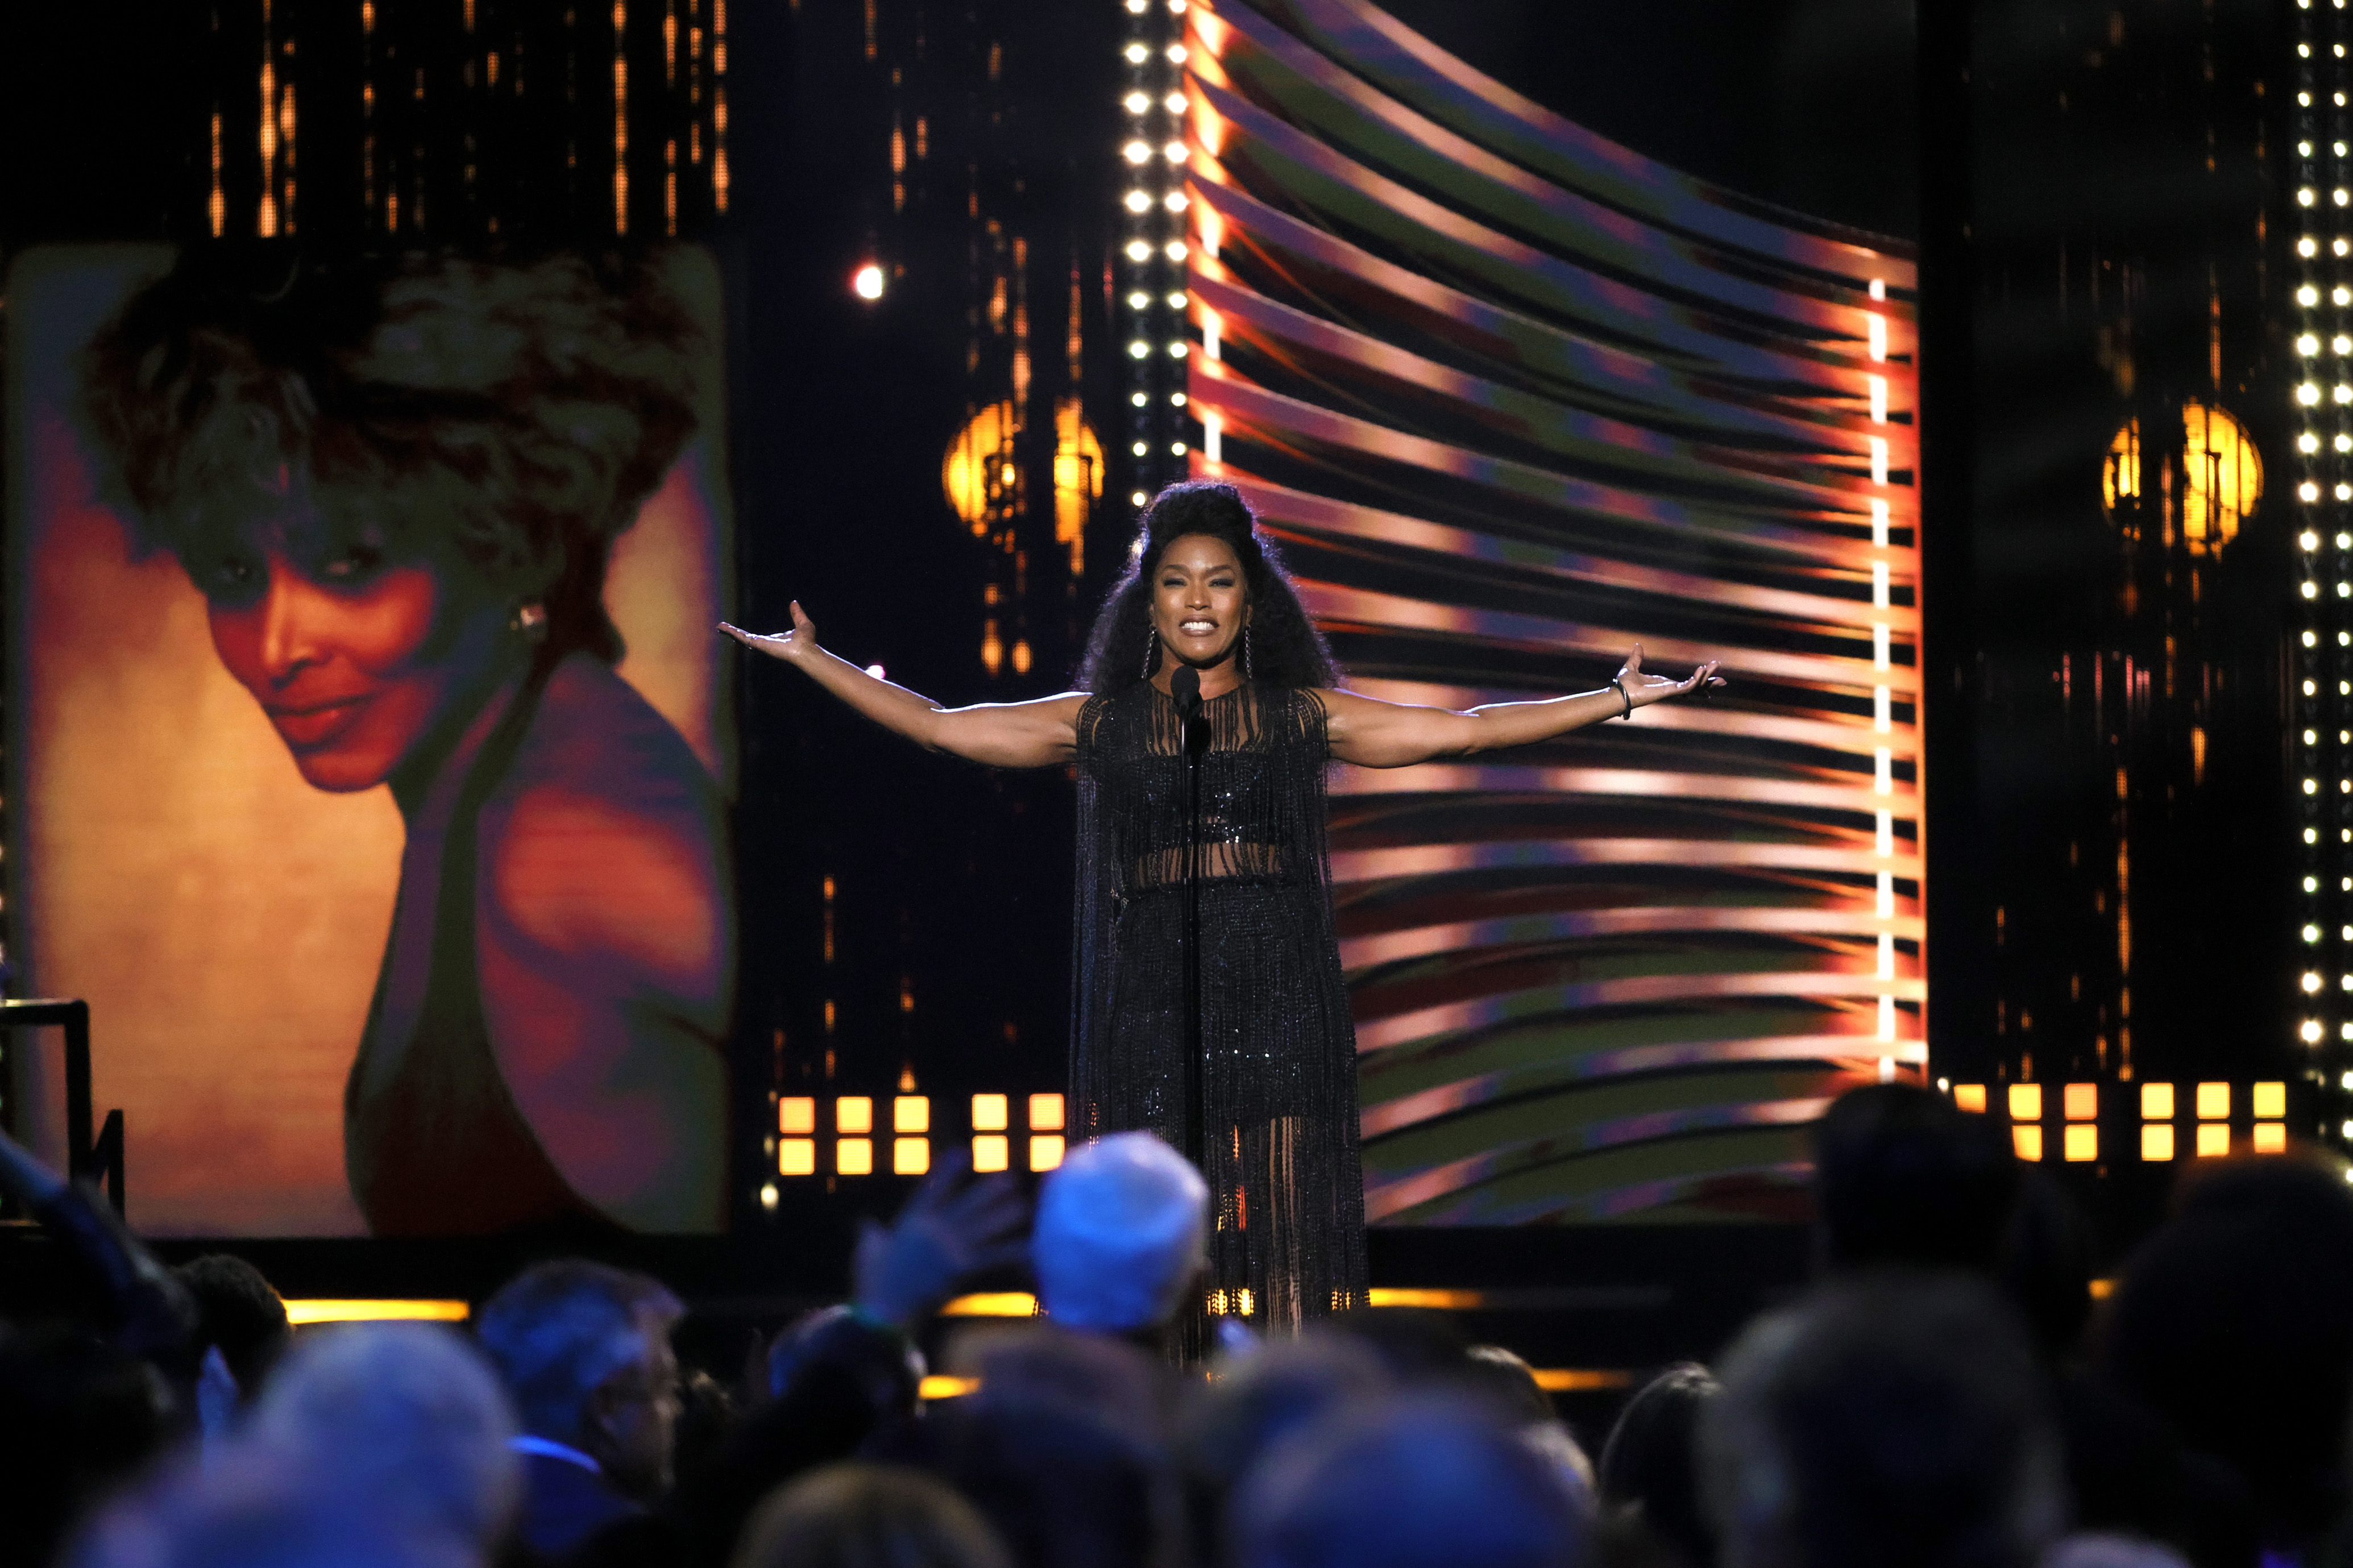 Angela Bassett inducts Tina Turner onstage during the 36th Annual Rock & Roll Hall Of Fame Induction Ceremony at Rocket Mortgage Fieldhouse on October 30, 2021 in Cleveland, Ohio. (Photo by Michael Loccisano/Getty Images for The Rock and Roll Hall of Fame)